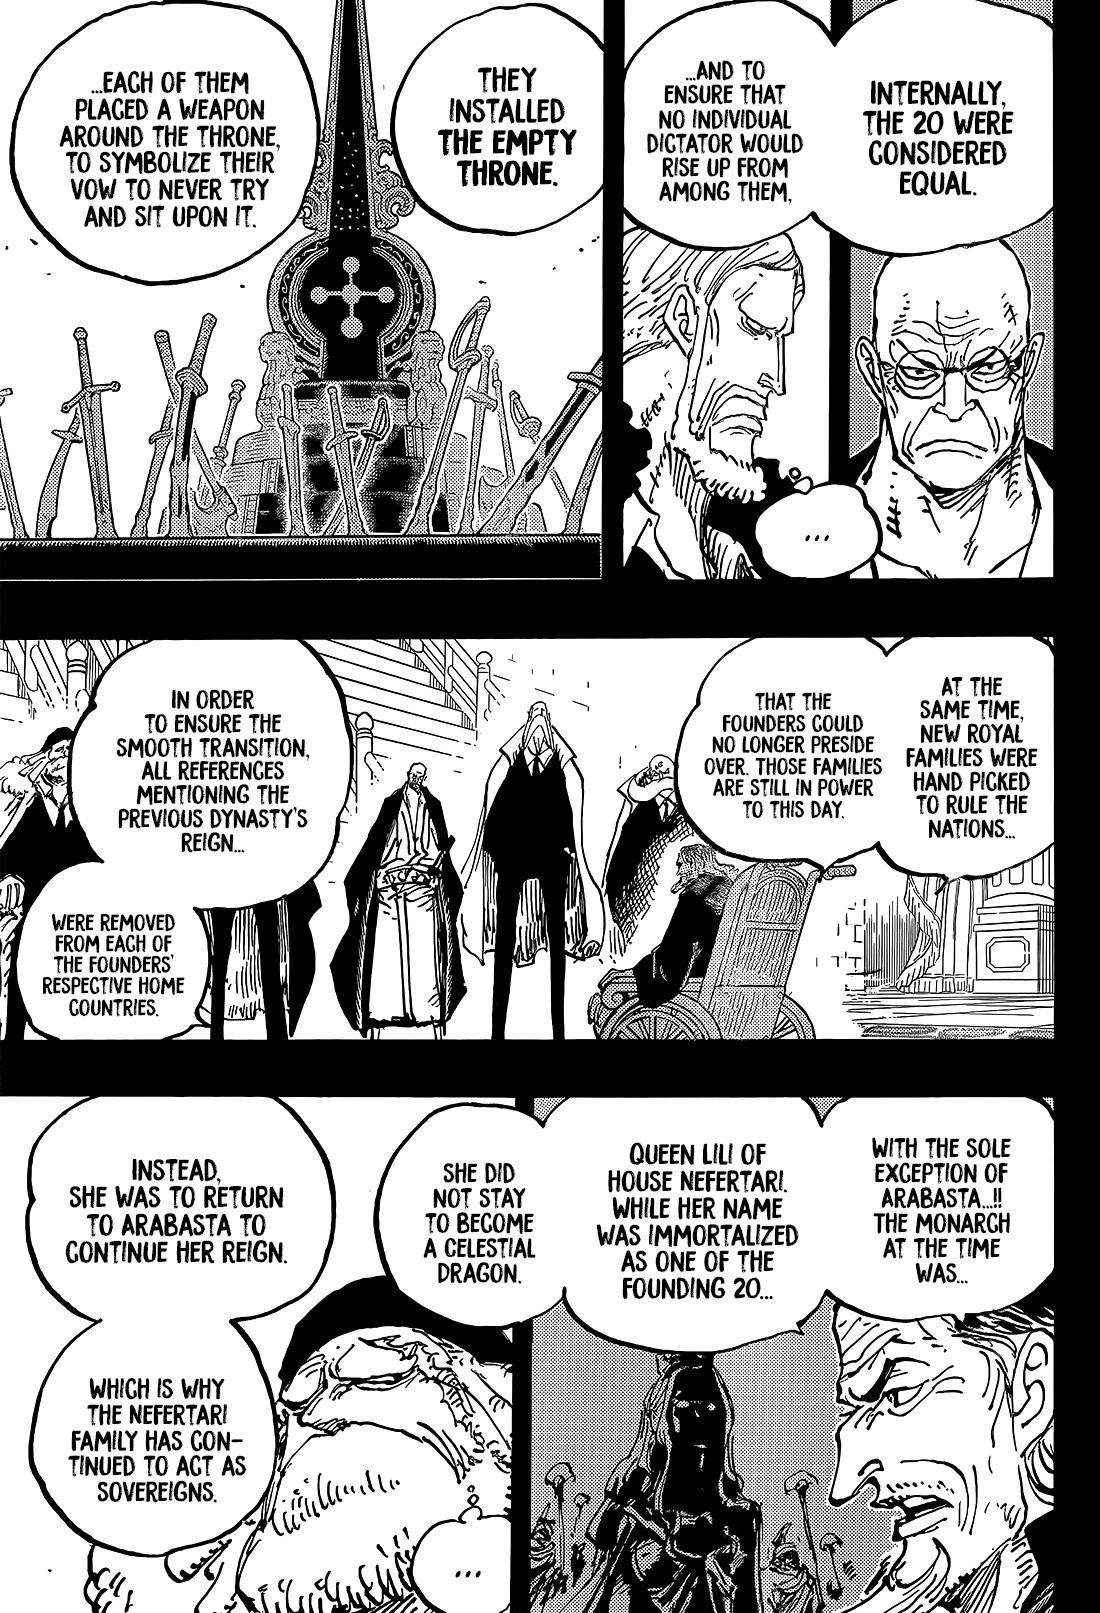 One Piece Chapter 1084: The Attempted Murder Of A Celestial Dragon page 8 - Mangakakalot